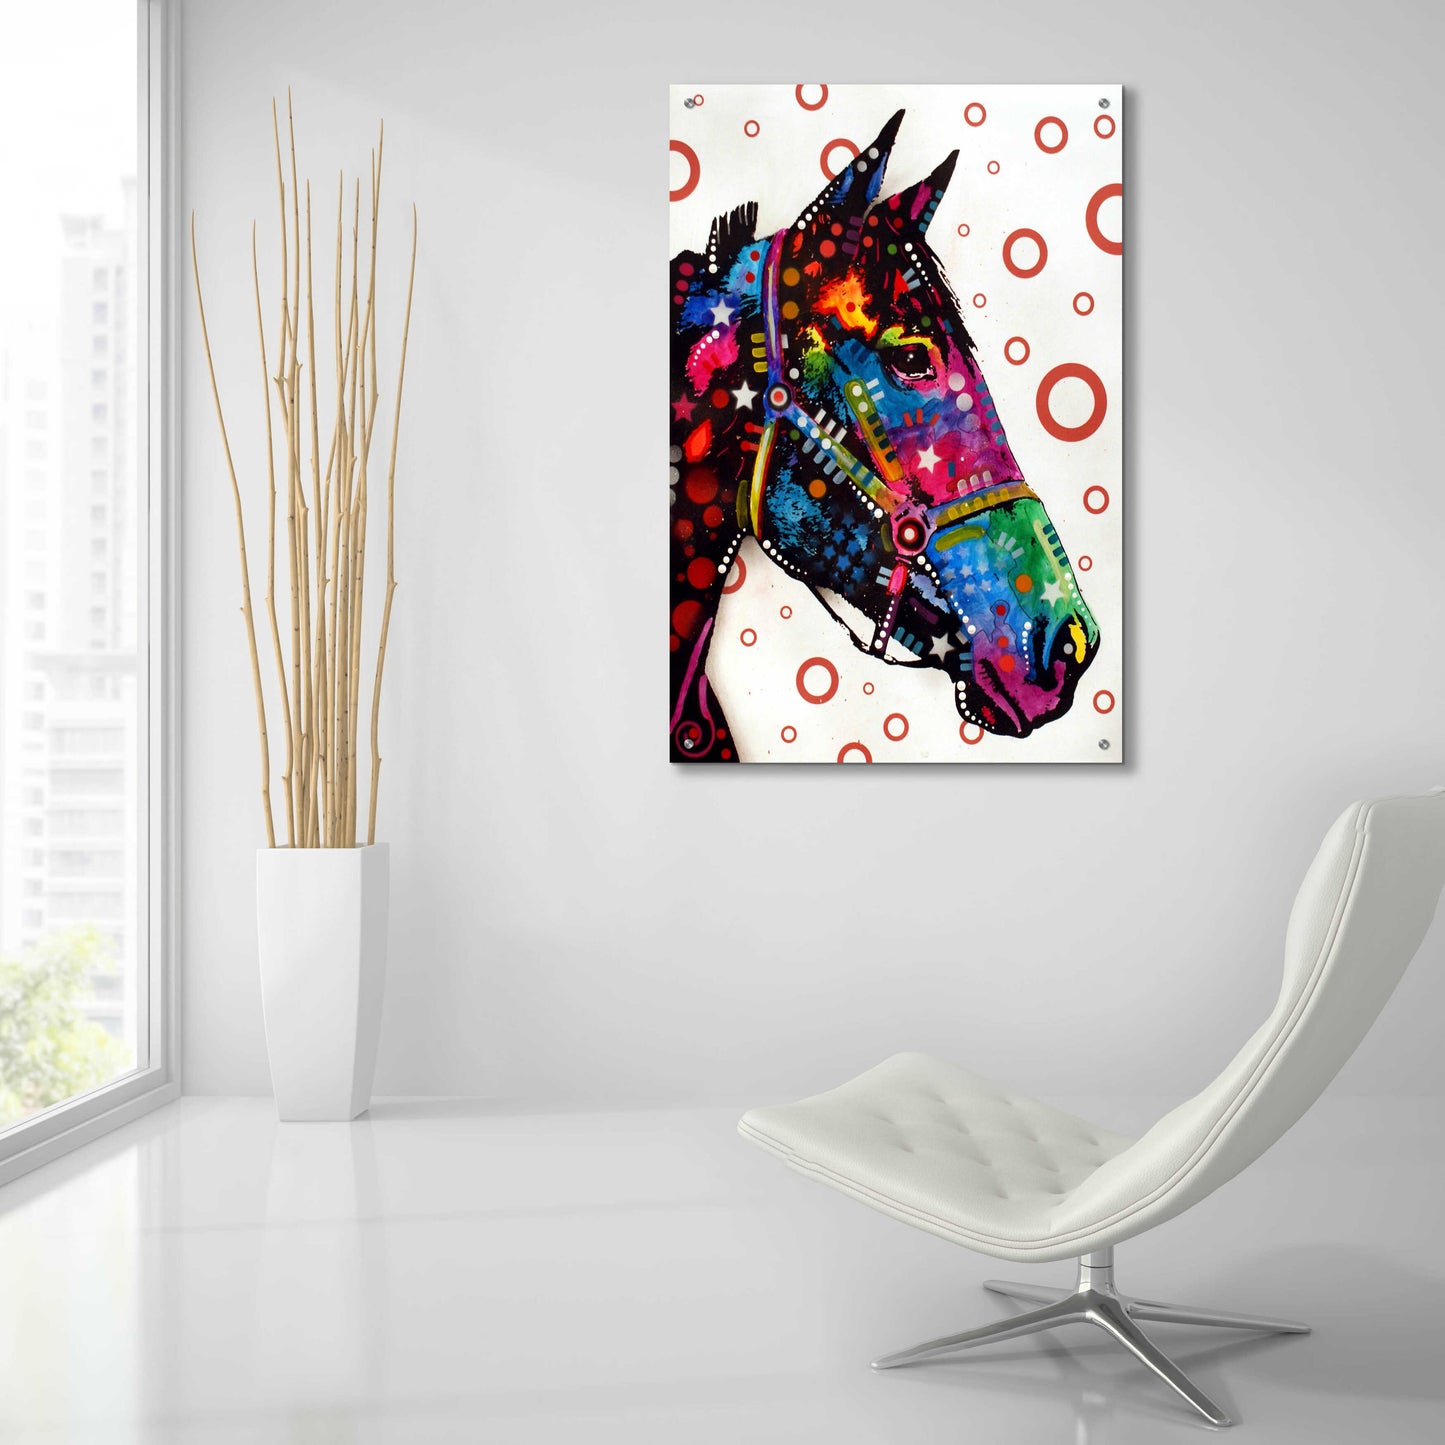 Epic Art 'Horse 1' by Dean Russo, Acrylic Glass Wall Art,24x36